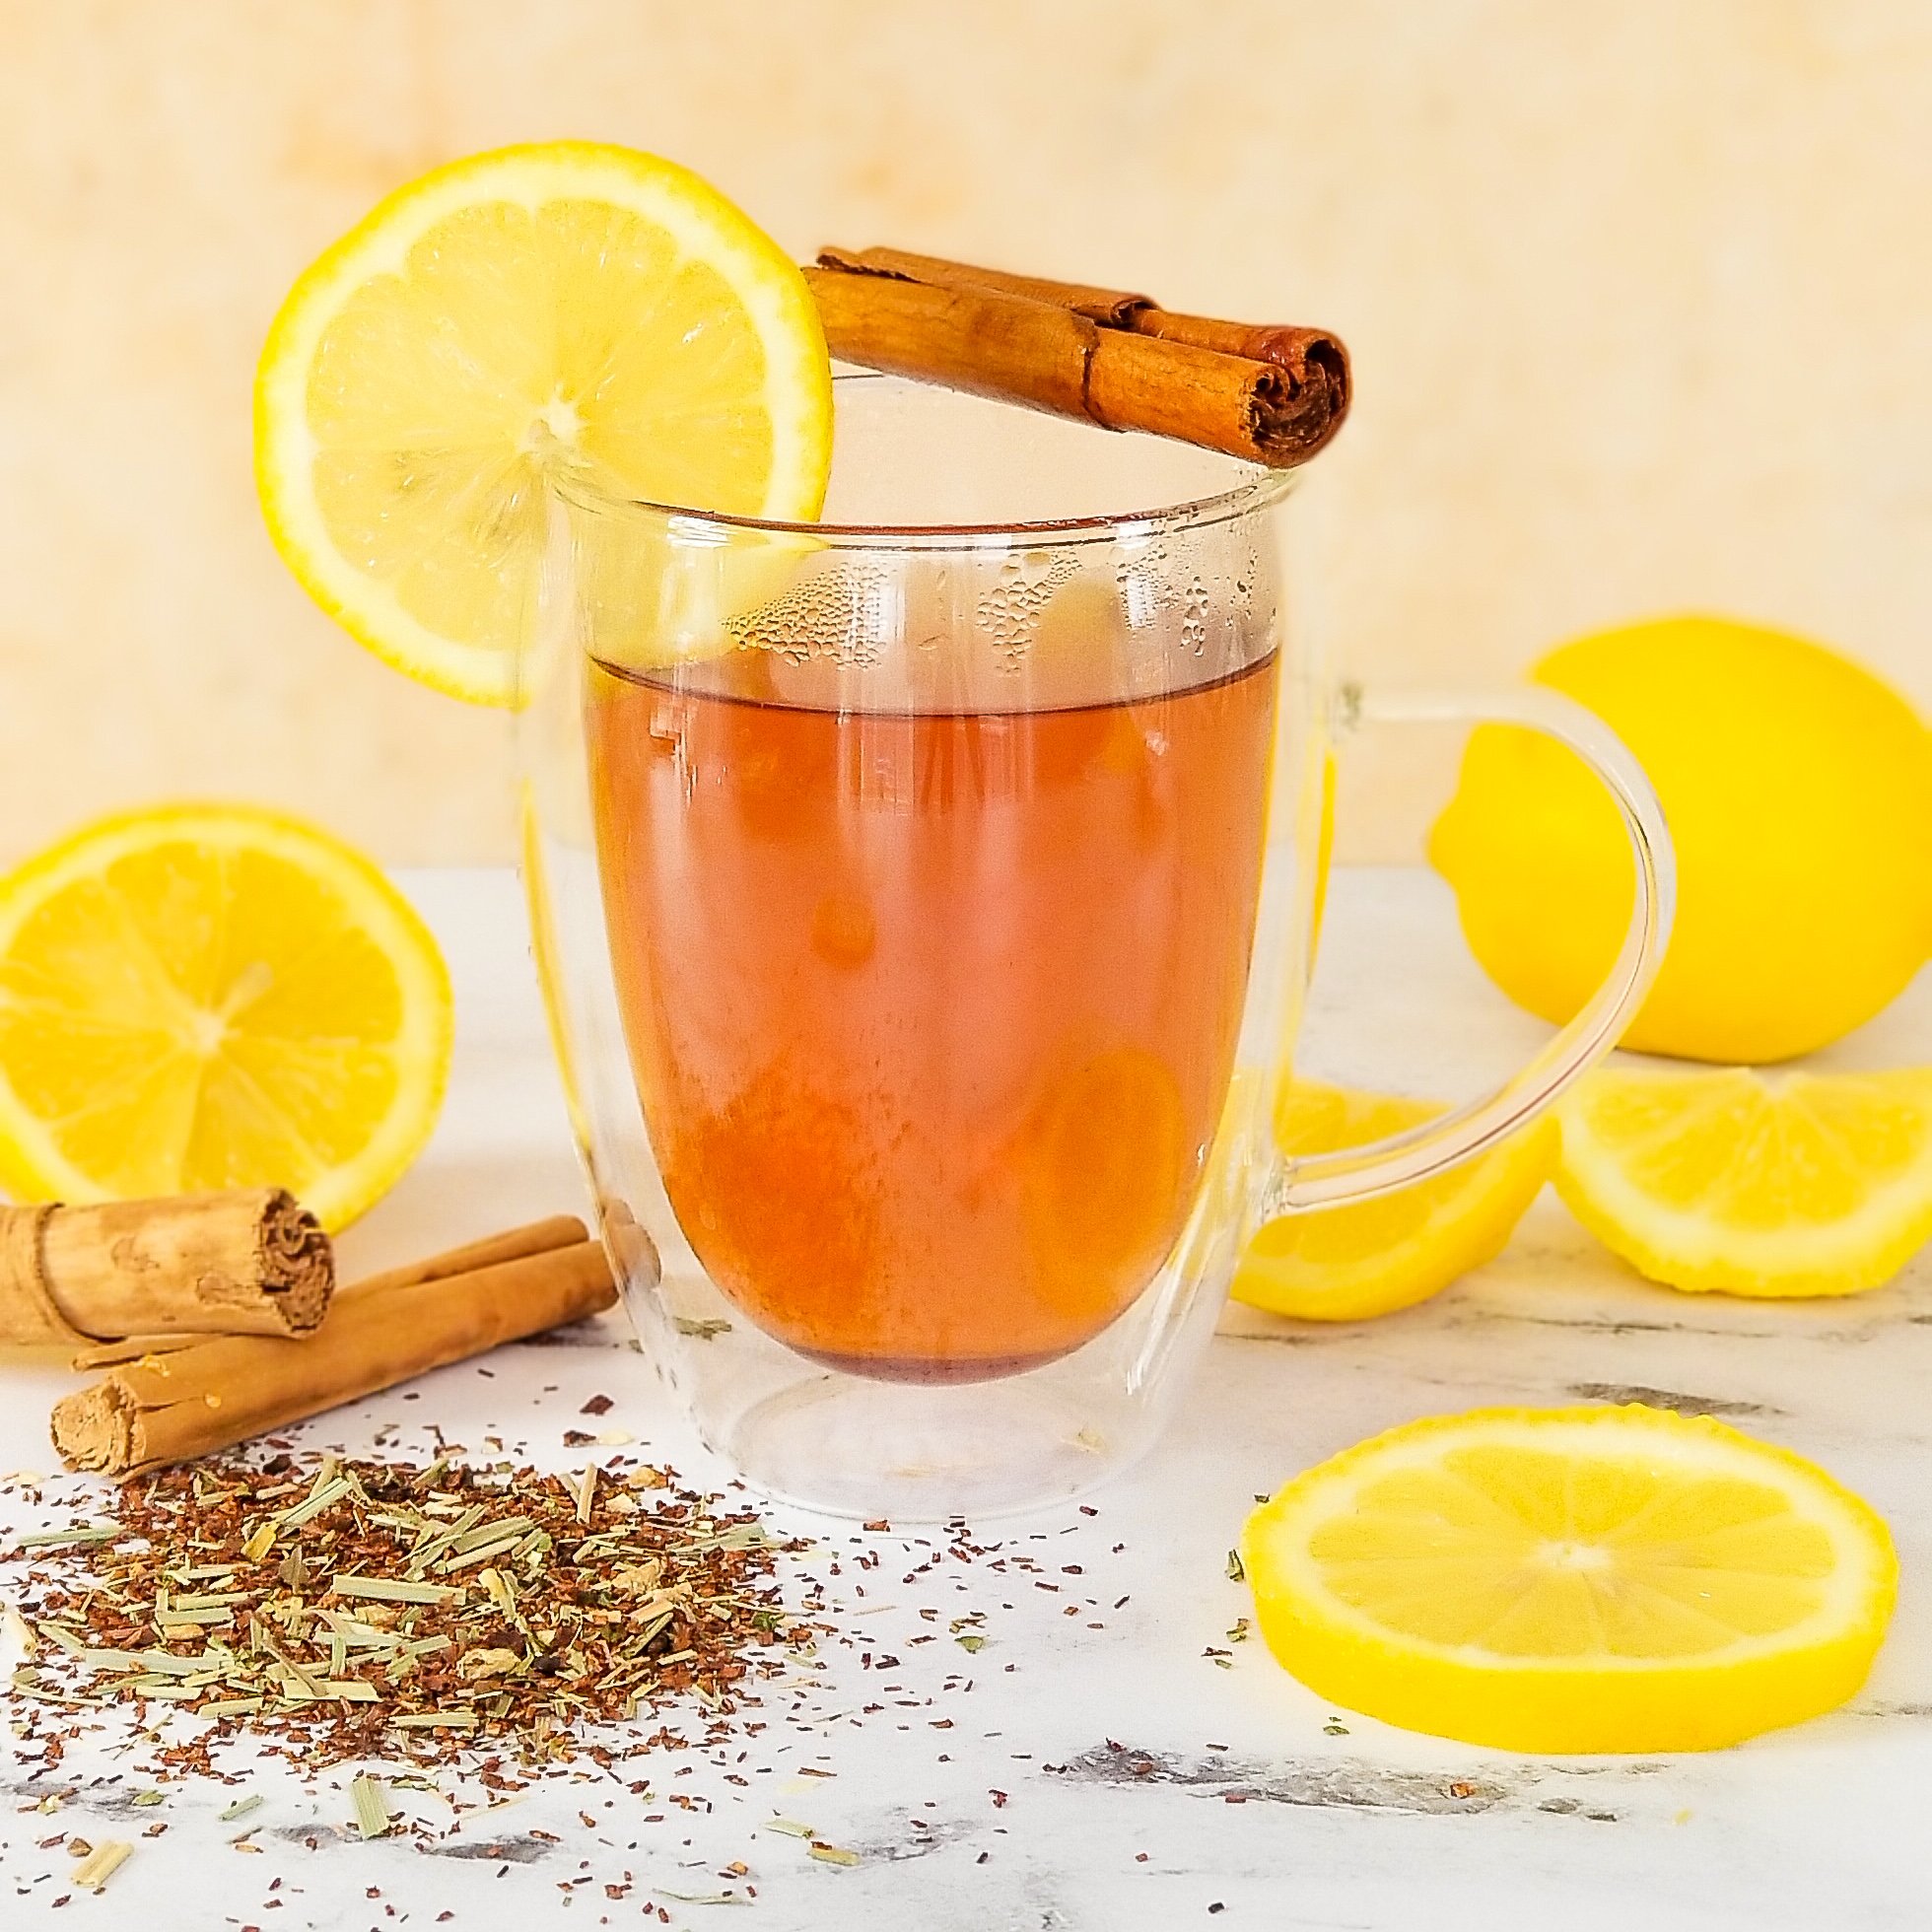 Hot Toddy Recipes to Boost Health | First For Women